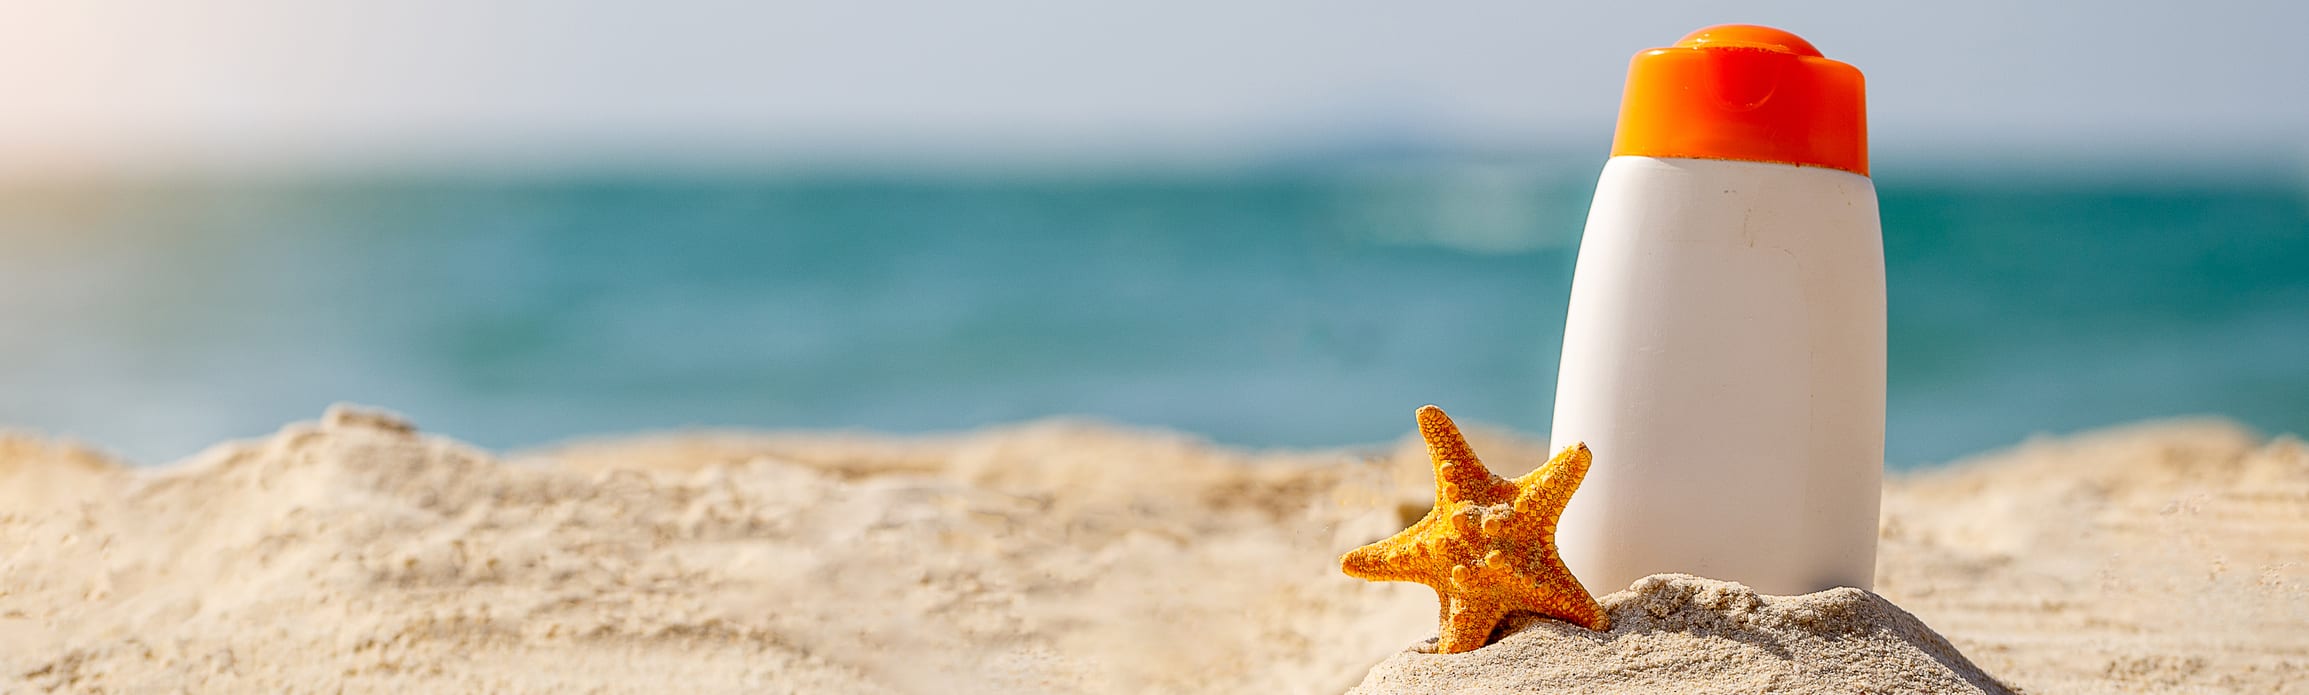 Sunscreen and starfish sitting in the sand in front of the ocean